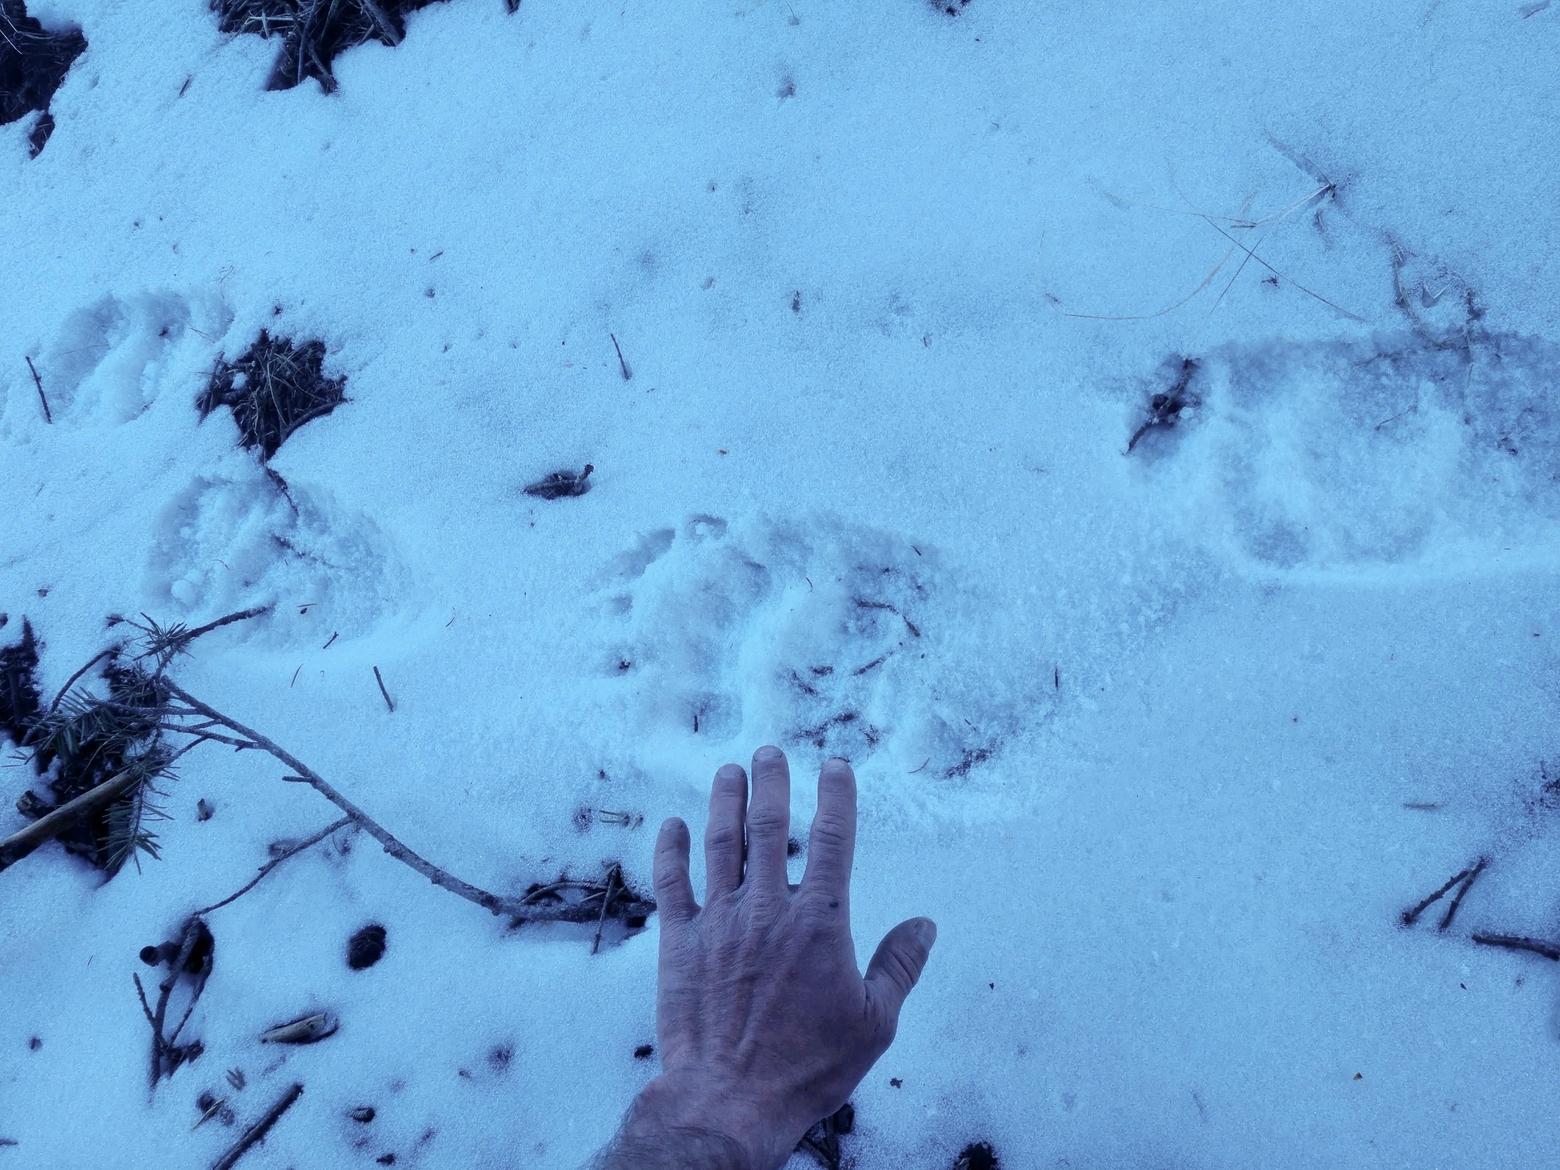 Keegan David places a hand next to the paw print of a grizzly bear. "I cross their tracks but that set was large," he says. Photo courtesy Keegan David